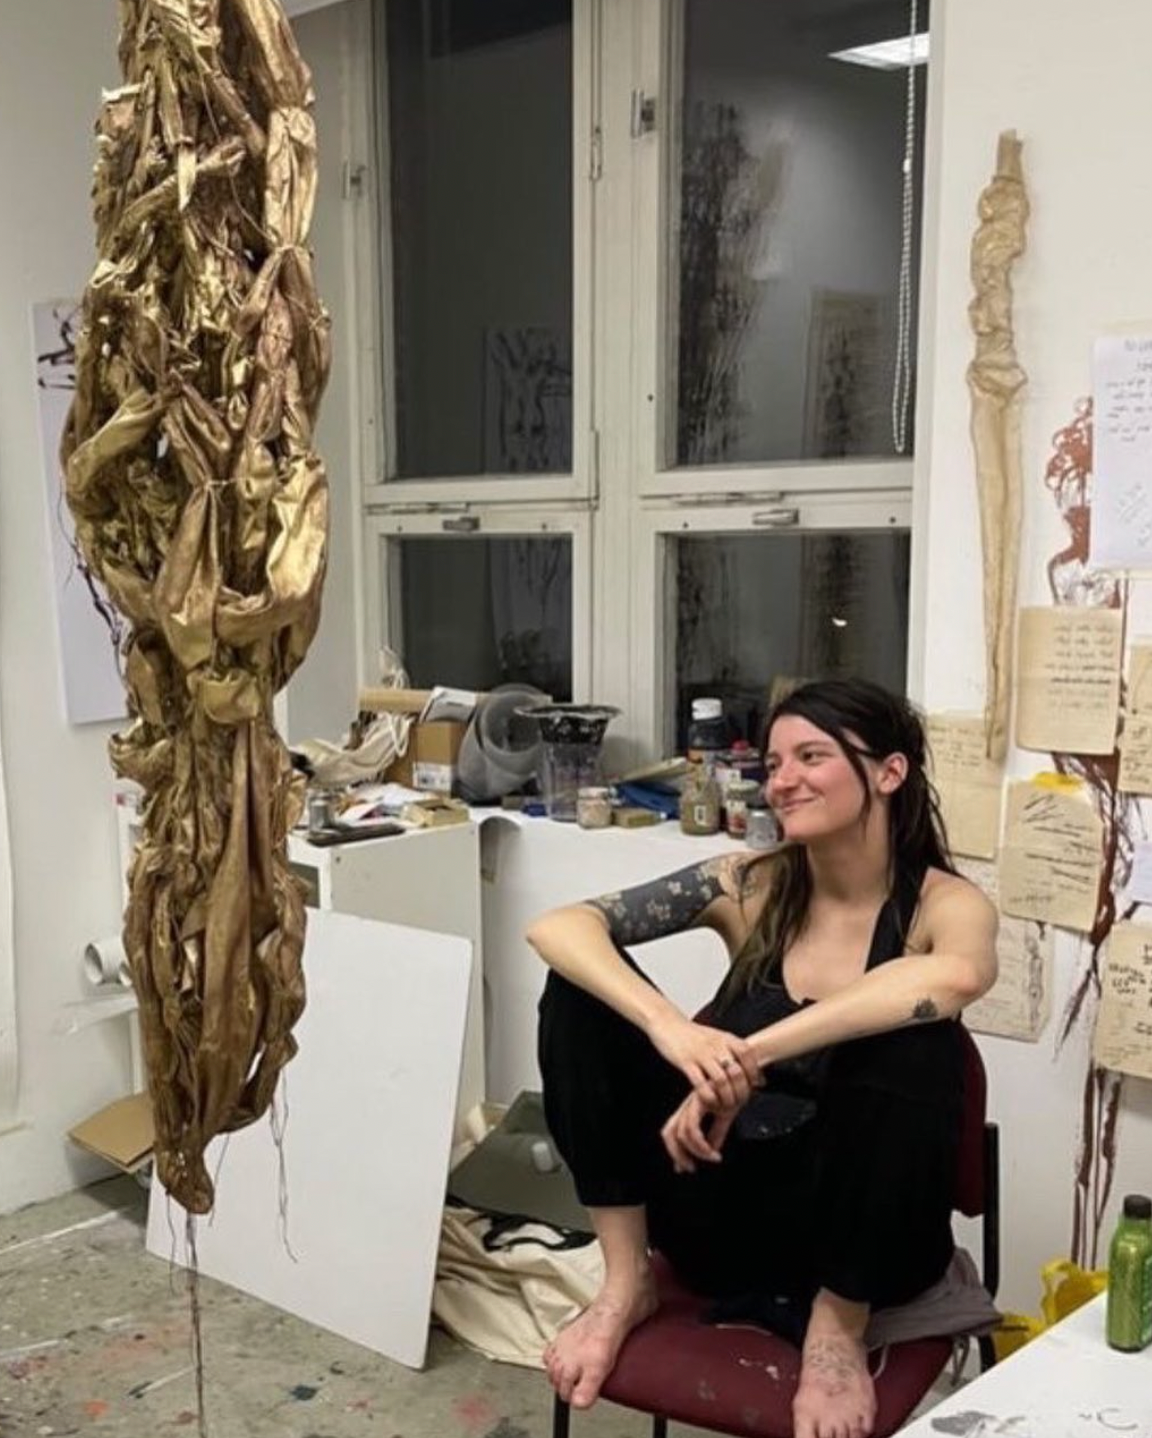 Life Model Sculpting & Drawing Workshop for Beginners with Ella in Berlin, Germany by subcultours